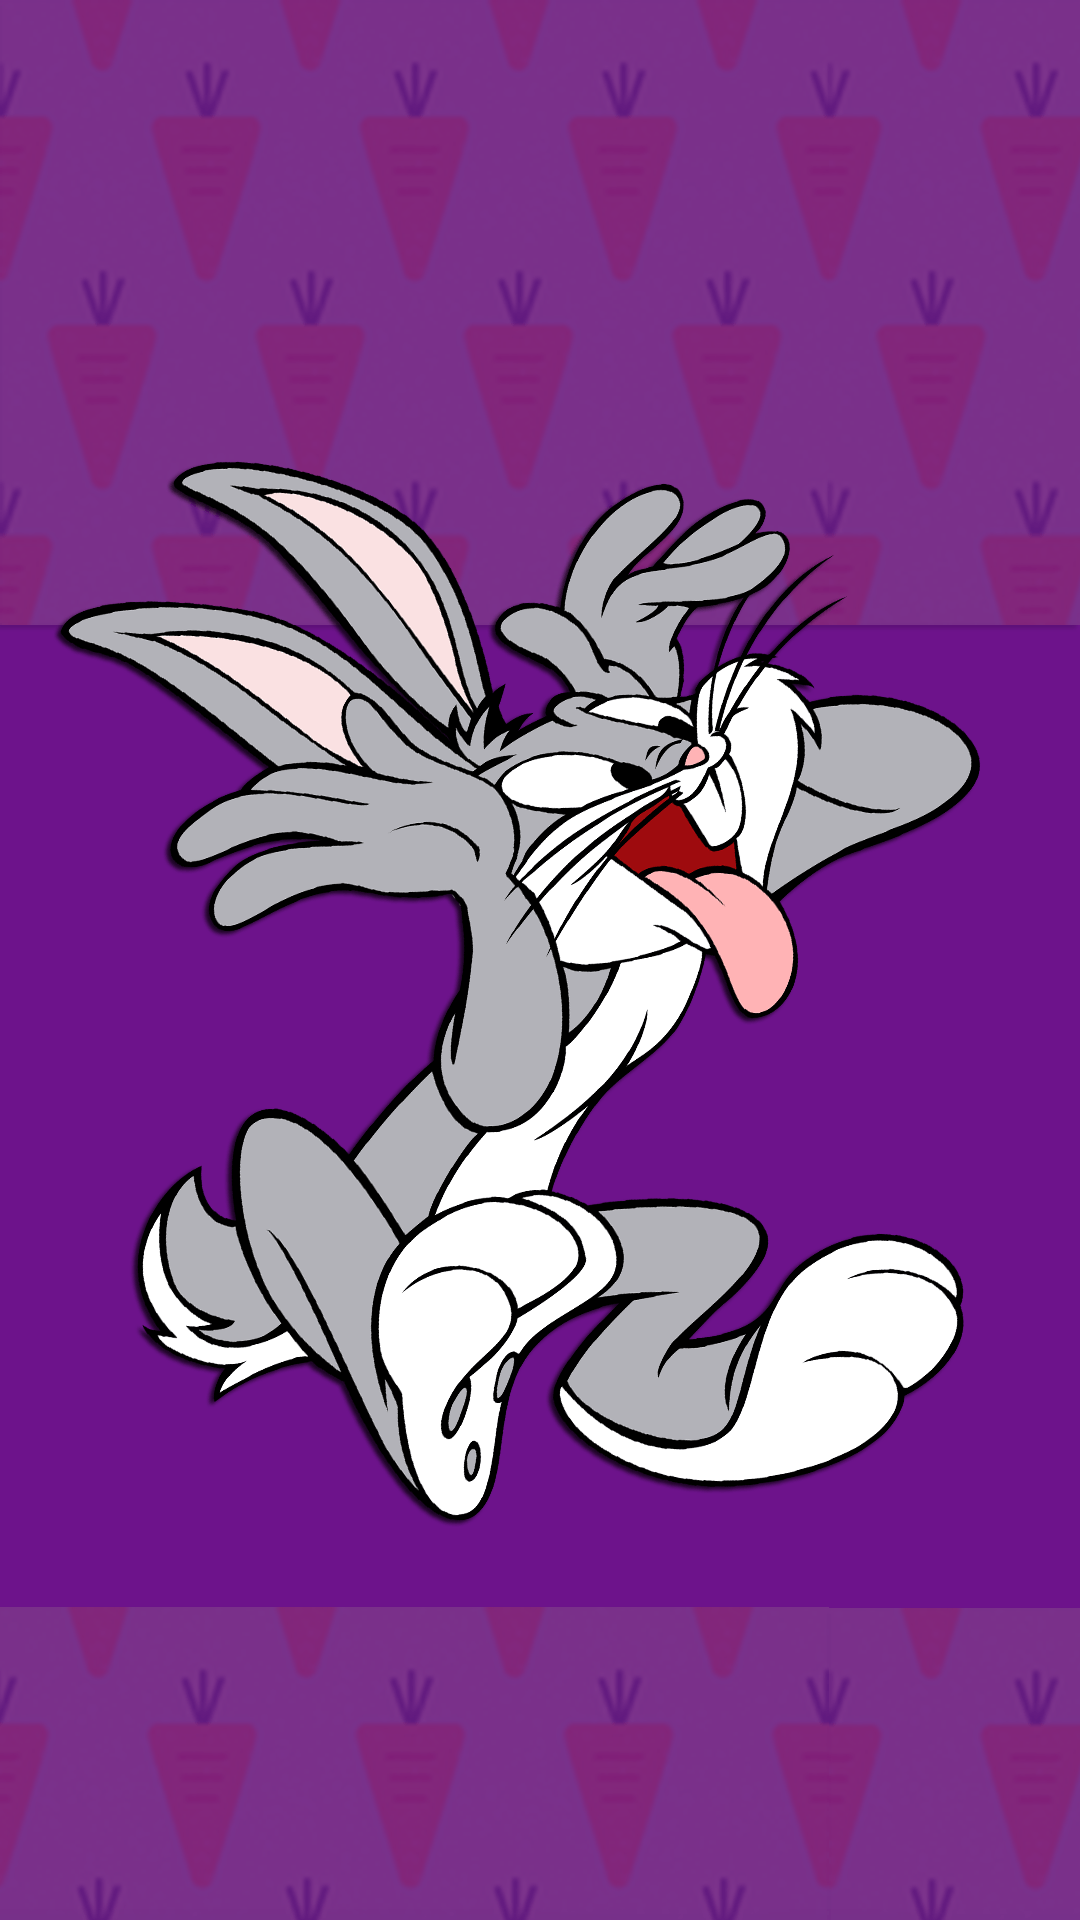 A cartoon rabbit with his tongue out - Bugs Bunny